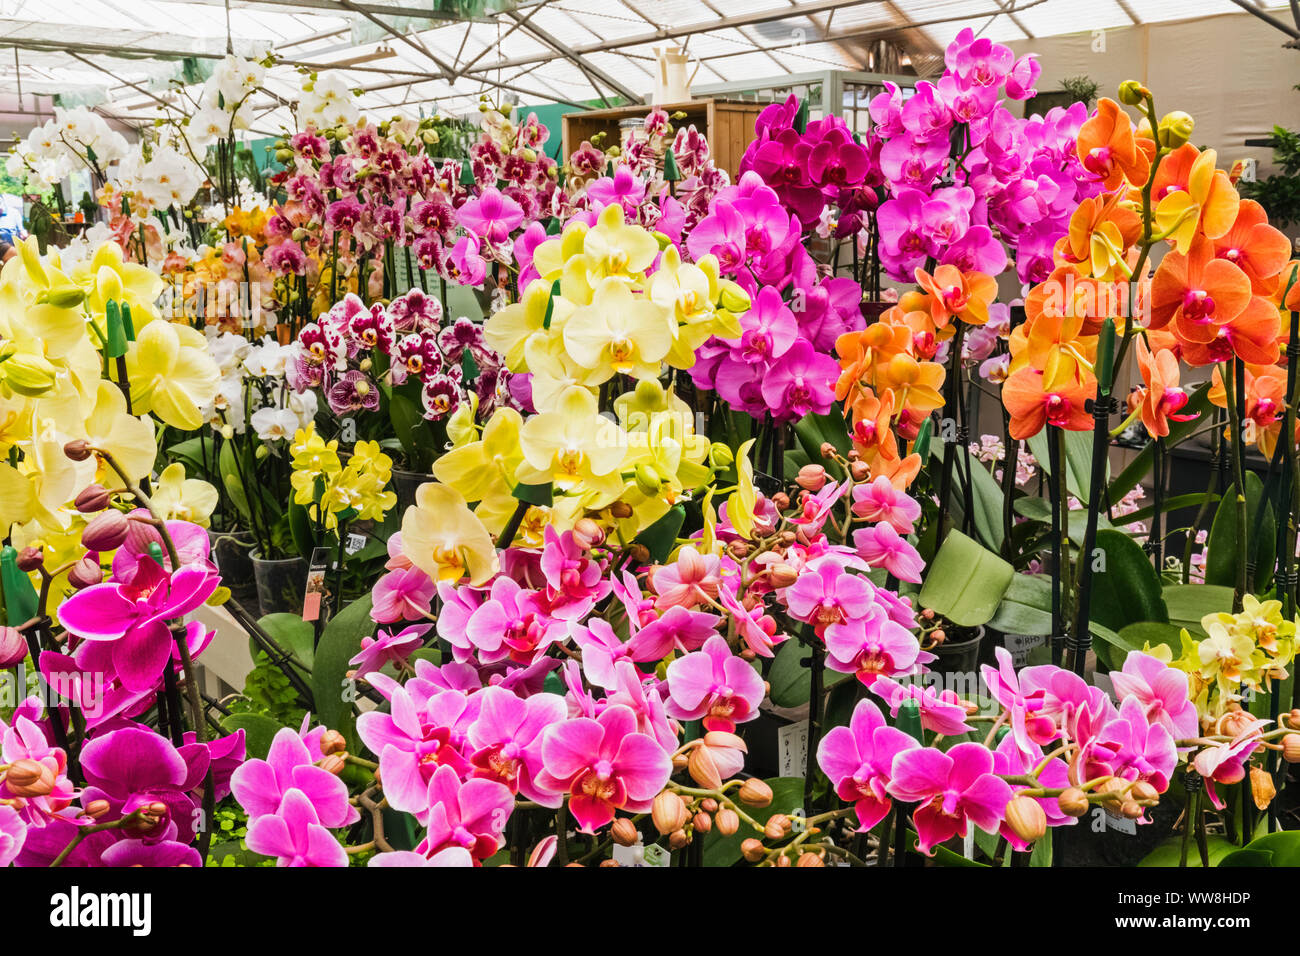 England, Surrey, Guildford, Wisley, The Royal Horticultural Society Garden, Plant Centre, Orchids for Sale Stock Photo